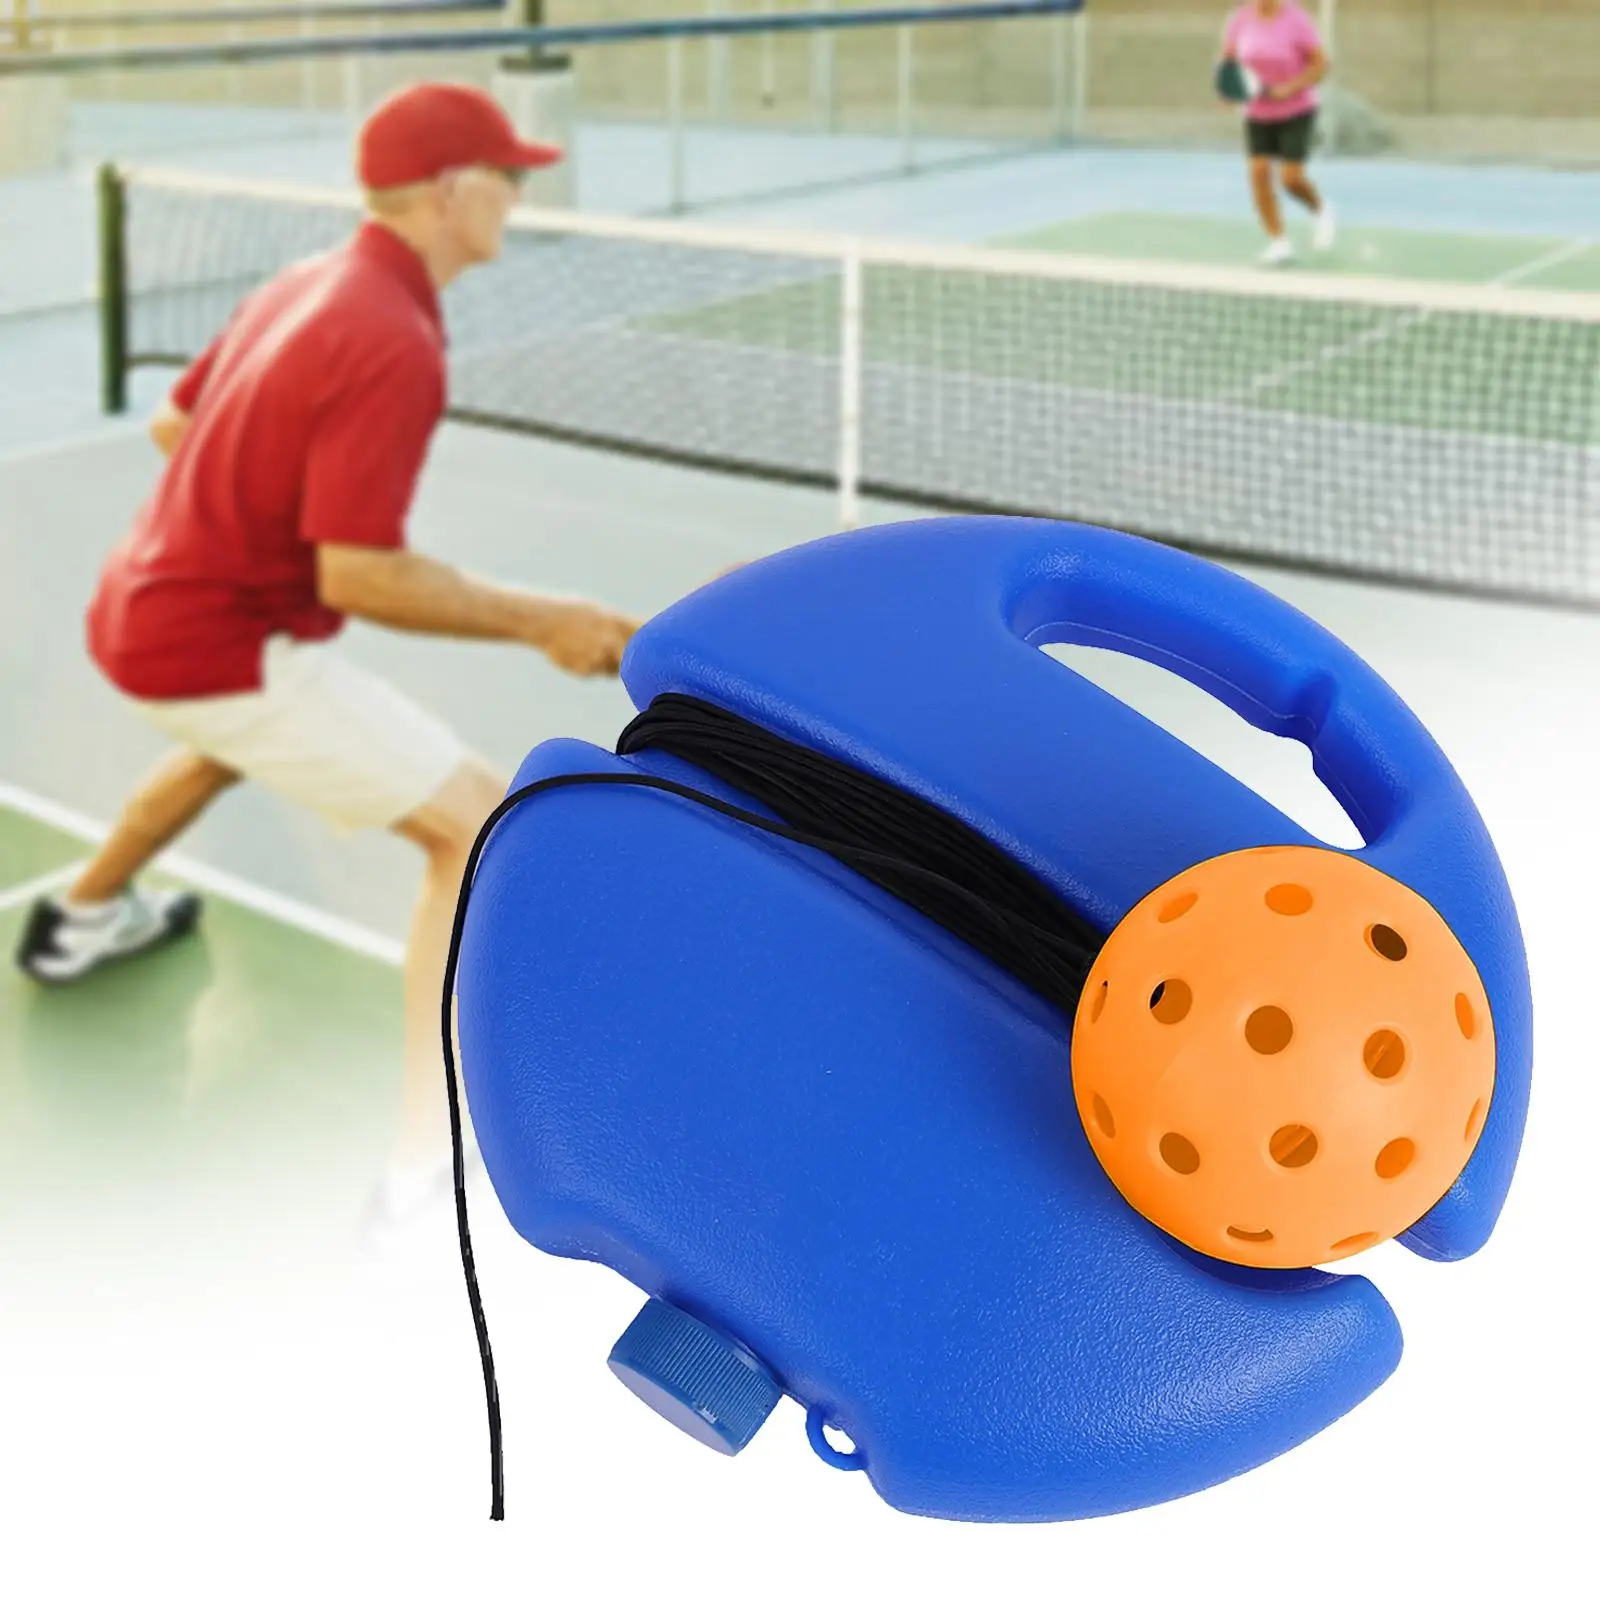 Pickleball Trainer with 40 Holes Pickleball Ball Rebound Practice Tool Pickleball Training Aid Pickleball Accessories for Sport